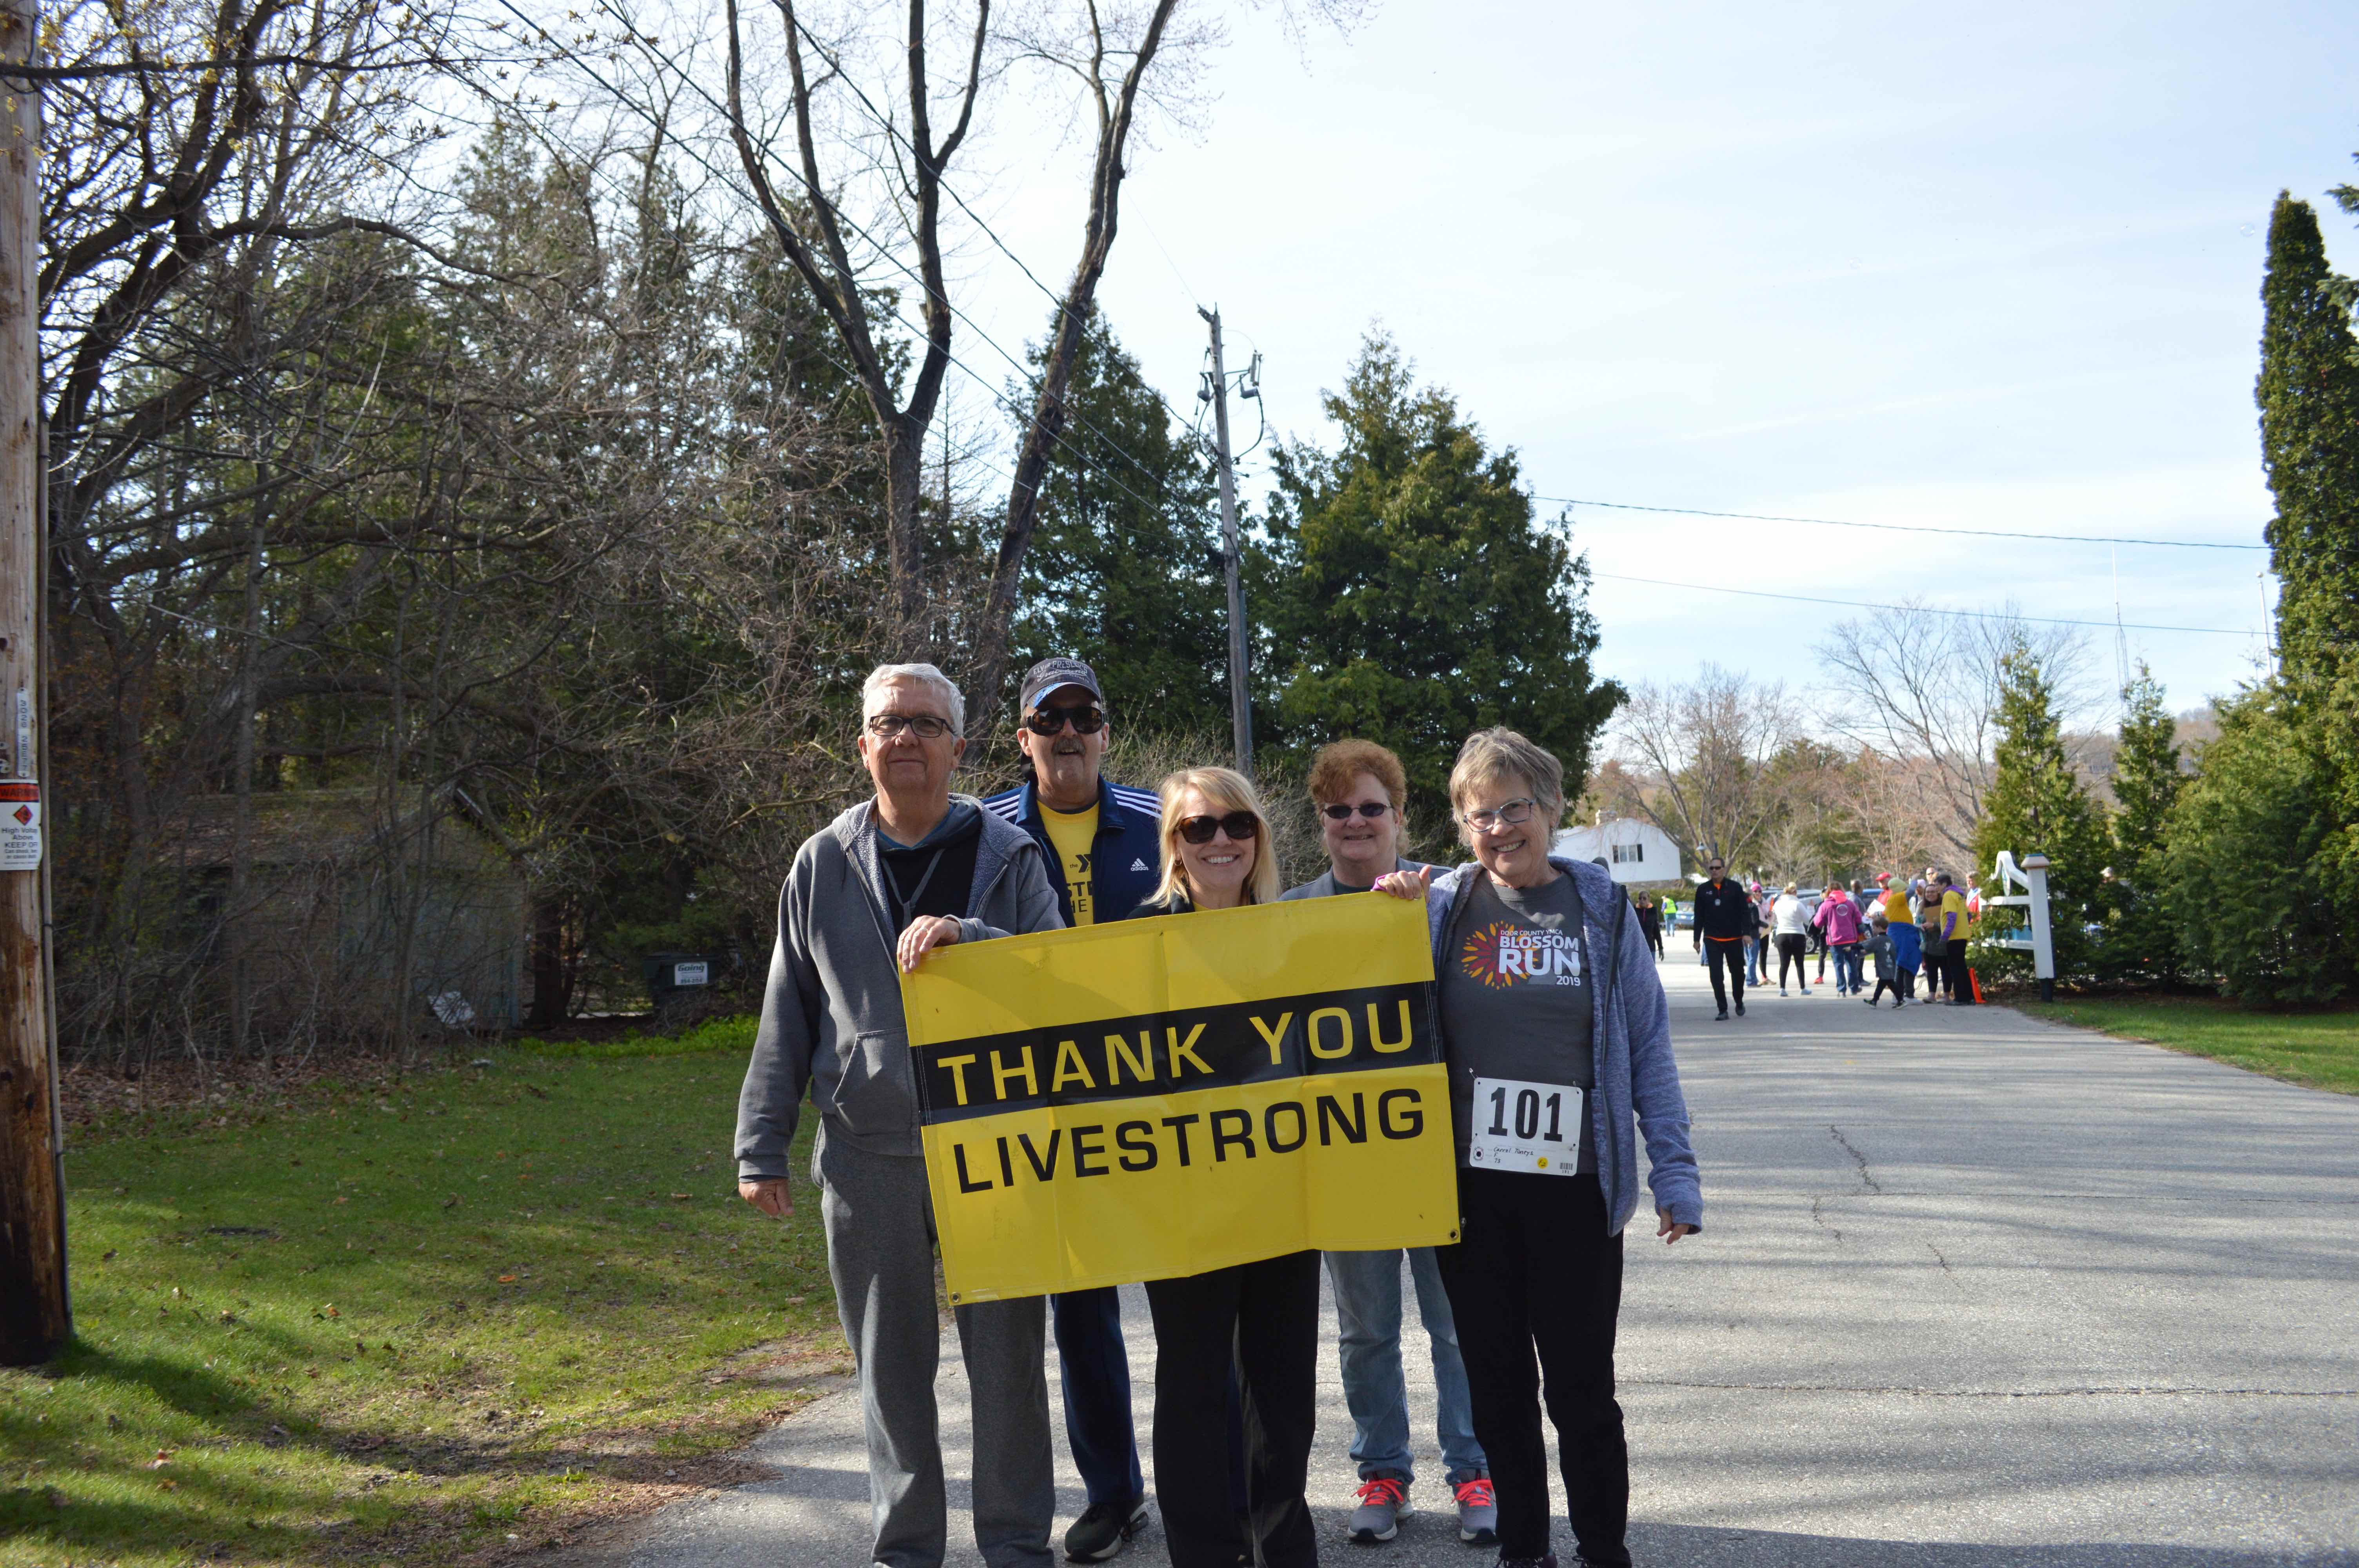 Livestrong group